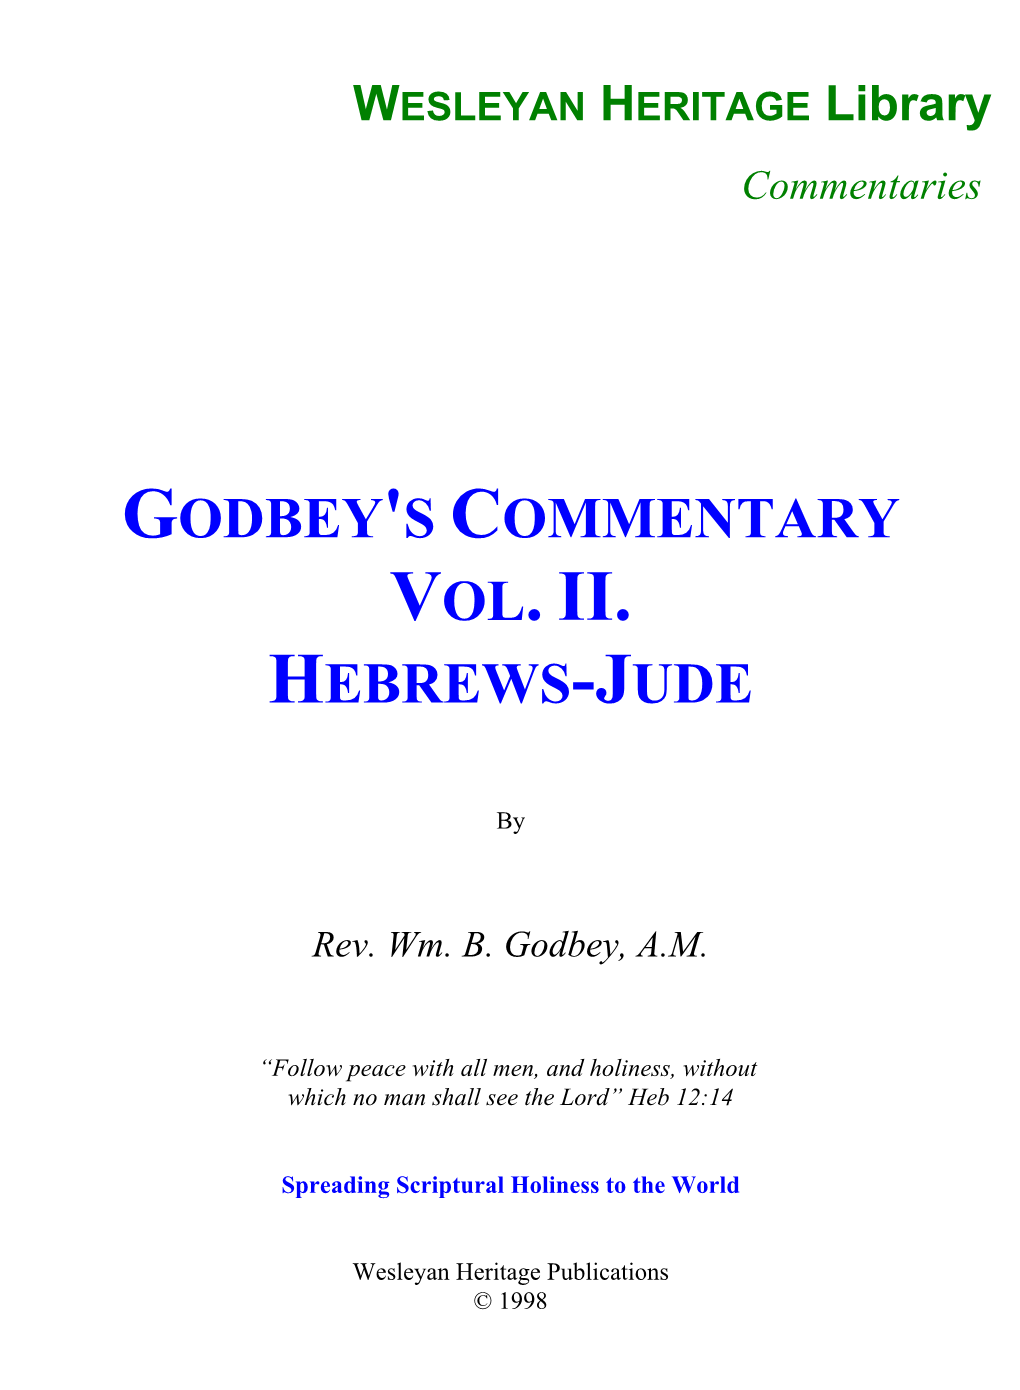 Godbey's Commentary Vol